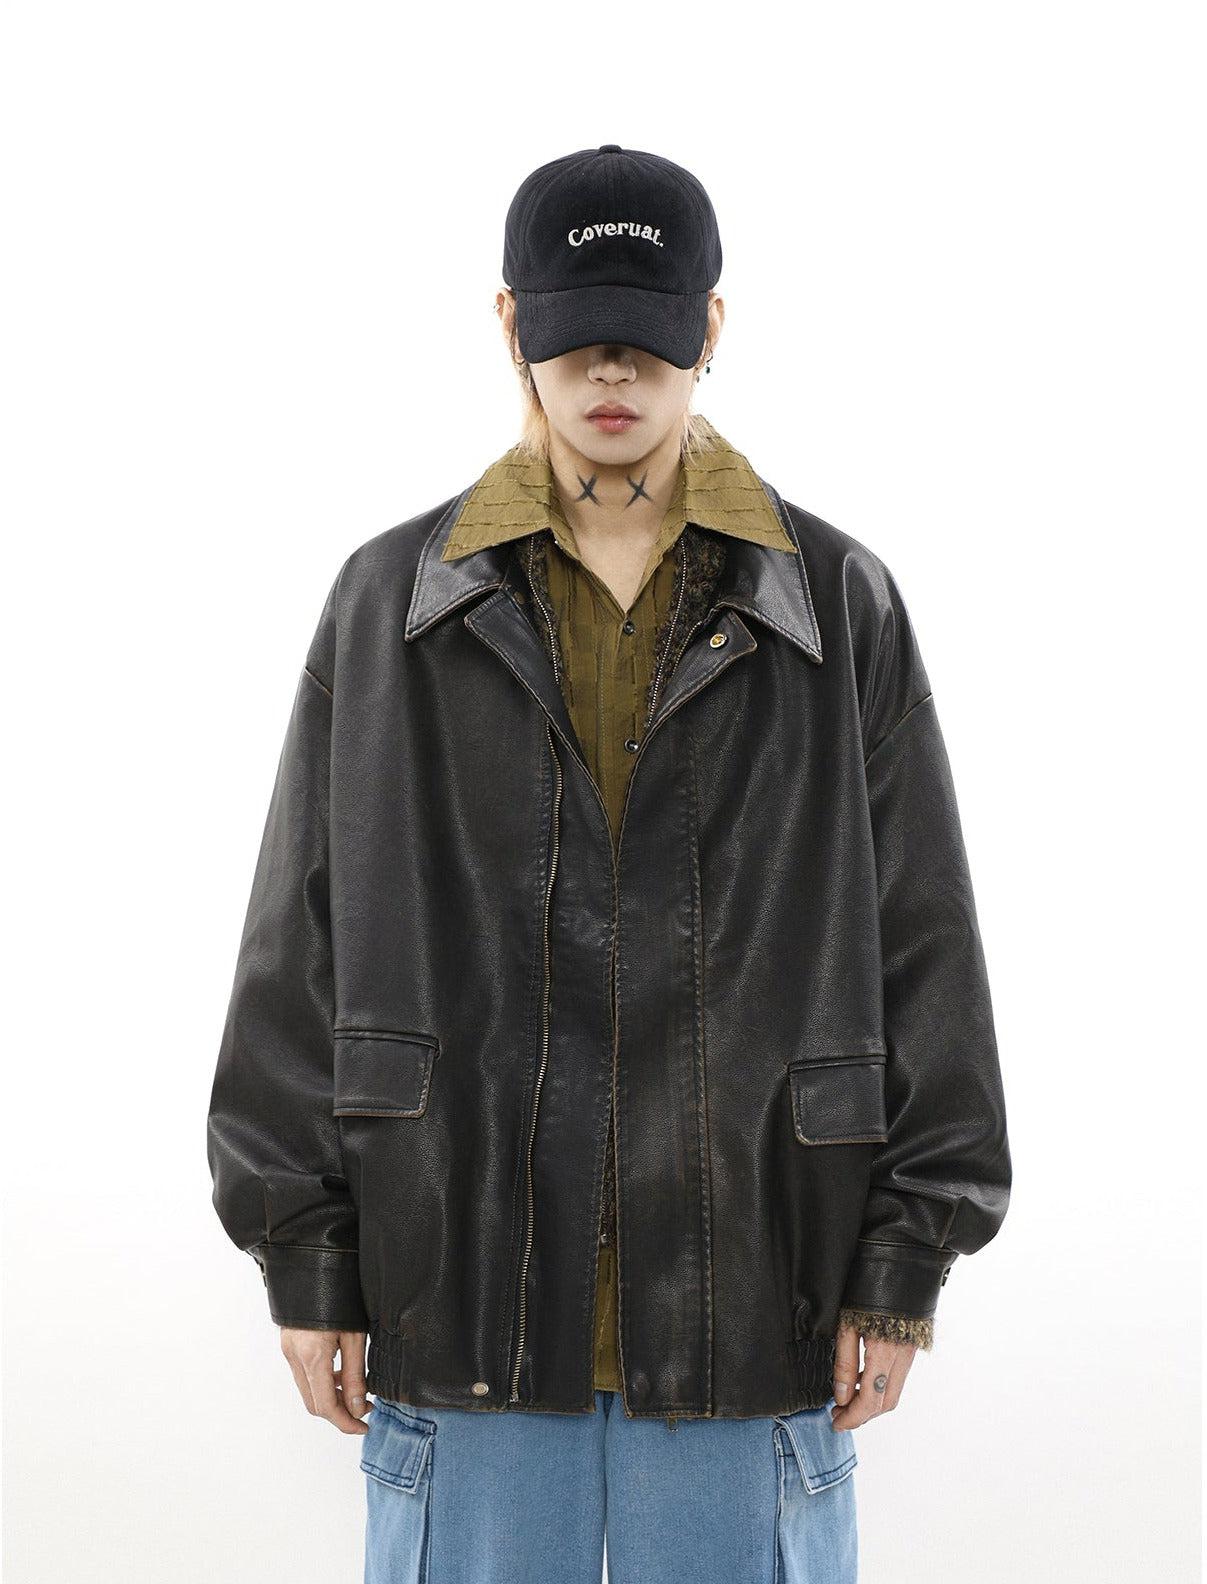 Mr Nearly Distressed Gartered Hem Faux Leather Jacket Korean Street Fashion Jacket By Mr Nearly Shop Online at OH Vault